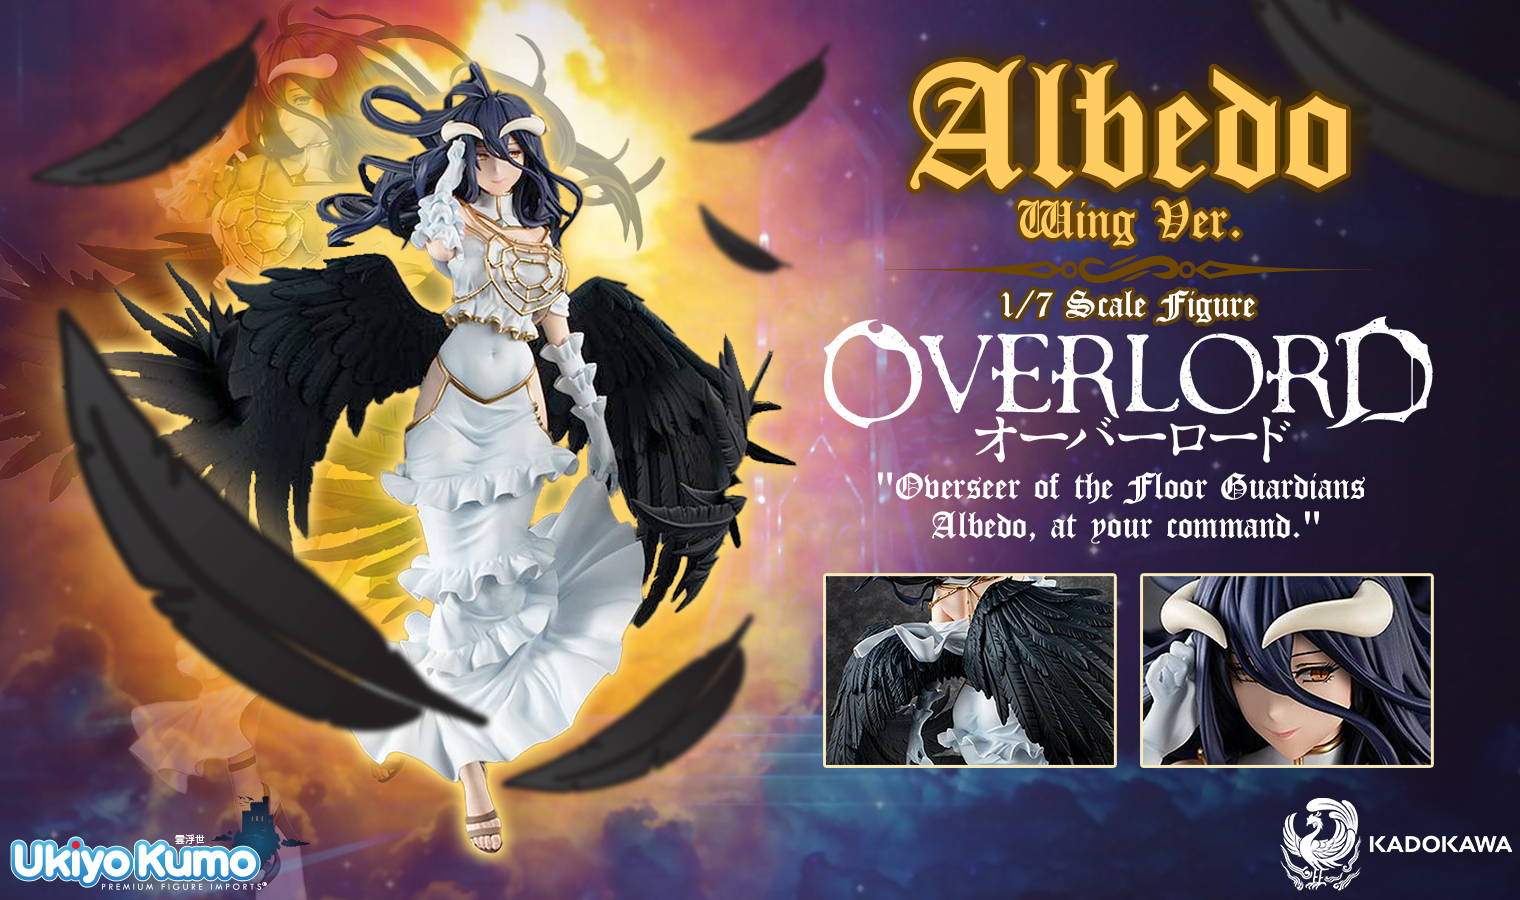 Overlord: Albedo Wing Ver. 1/7 Scale Figure